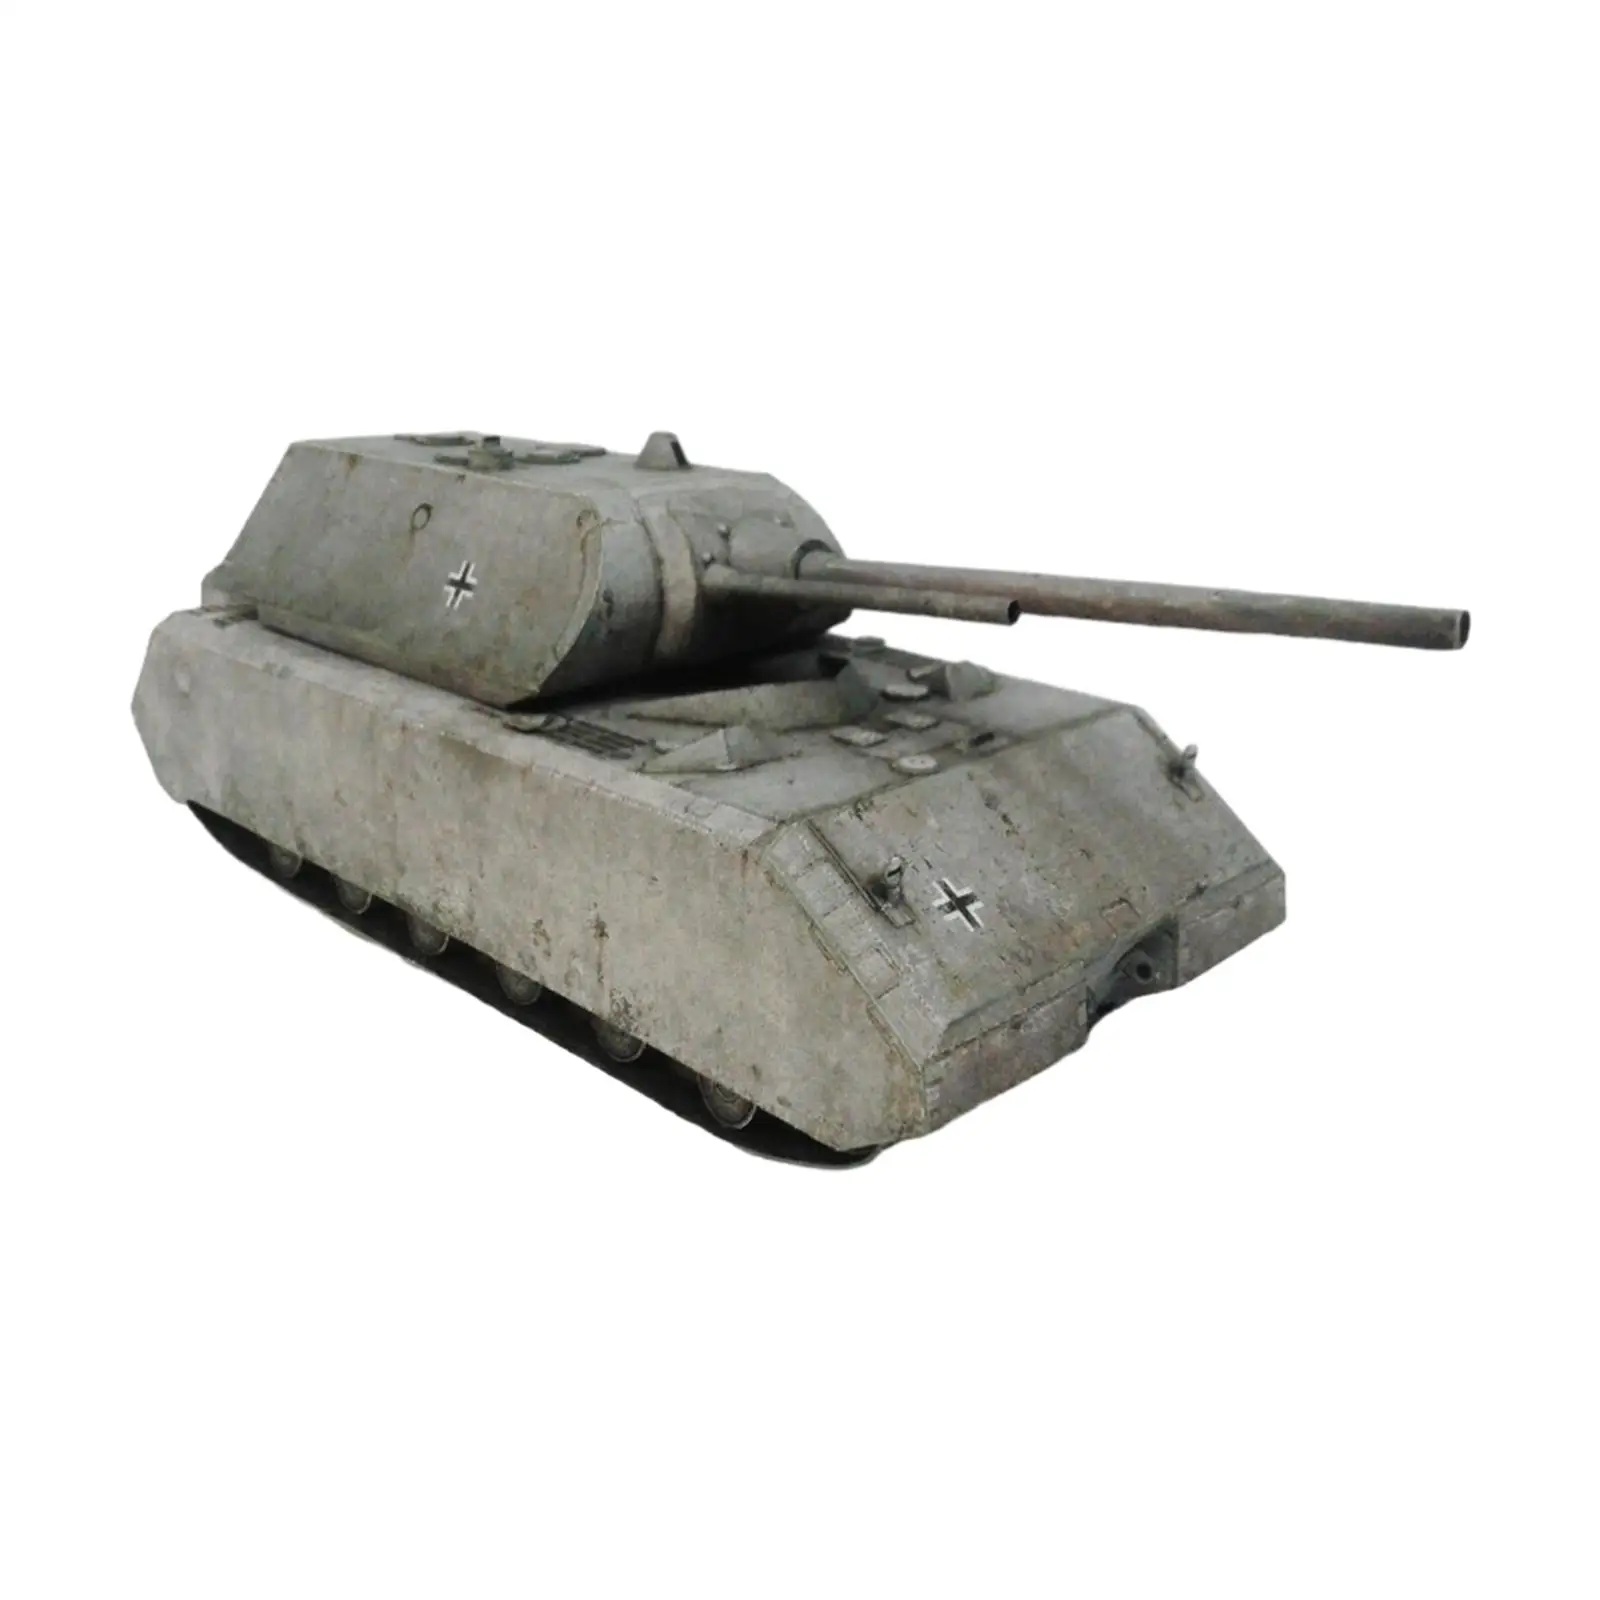 1:35 Armored Tank Model Home Decoration Collectables Educational Handmade Paper Tank Model Kits for Kids Adults Gifts Men Women